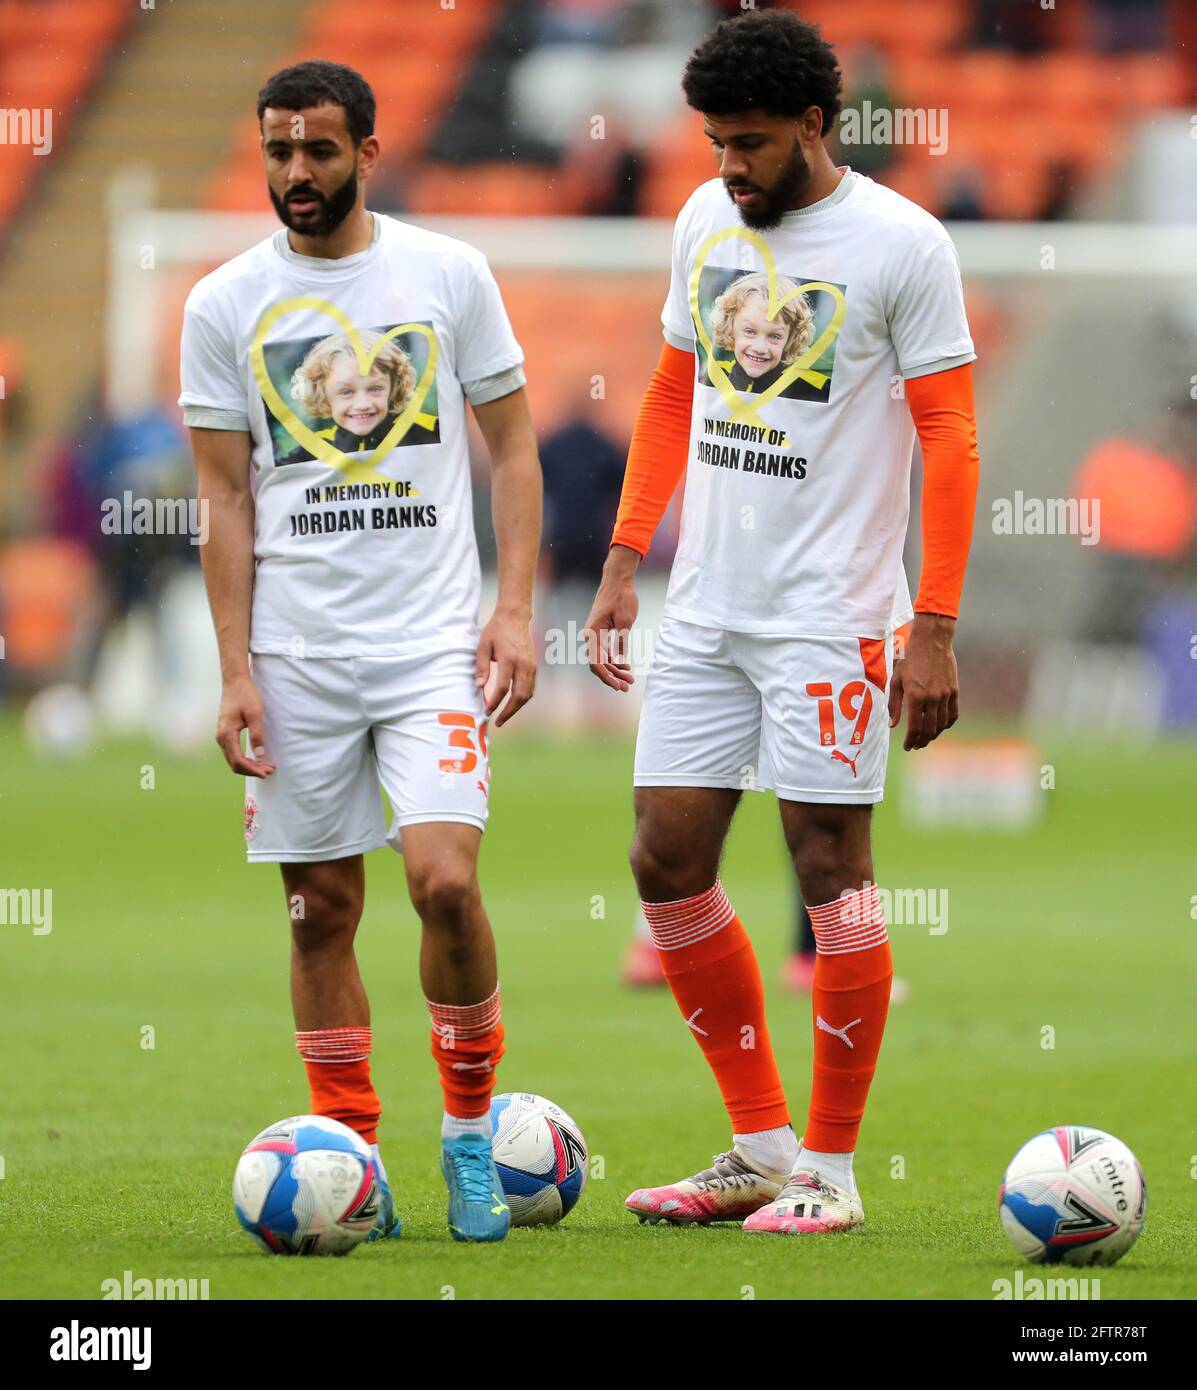 https://c8.alamy.com/comp/2FTR78T/blackpools-kevin-stewart-left-and-ellis-simms-wear-t-shirts-in-memory-of-jordan-banks-during-warm-up-prior-to-the-sky-bet-league-one-playoff-second-leg-match-at-the-bloomfield-road-blackpool-picture-date-friday-may-21-2021-2FTR78T.jpg